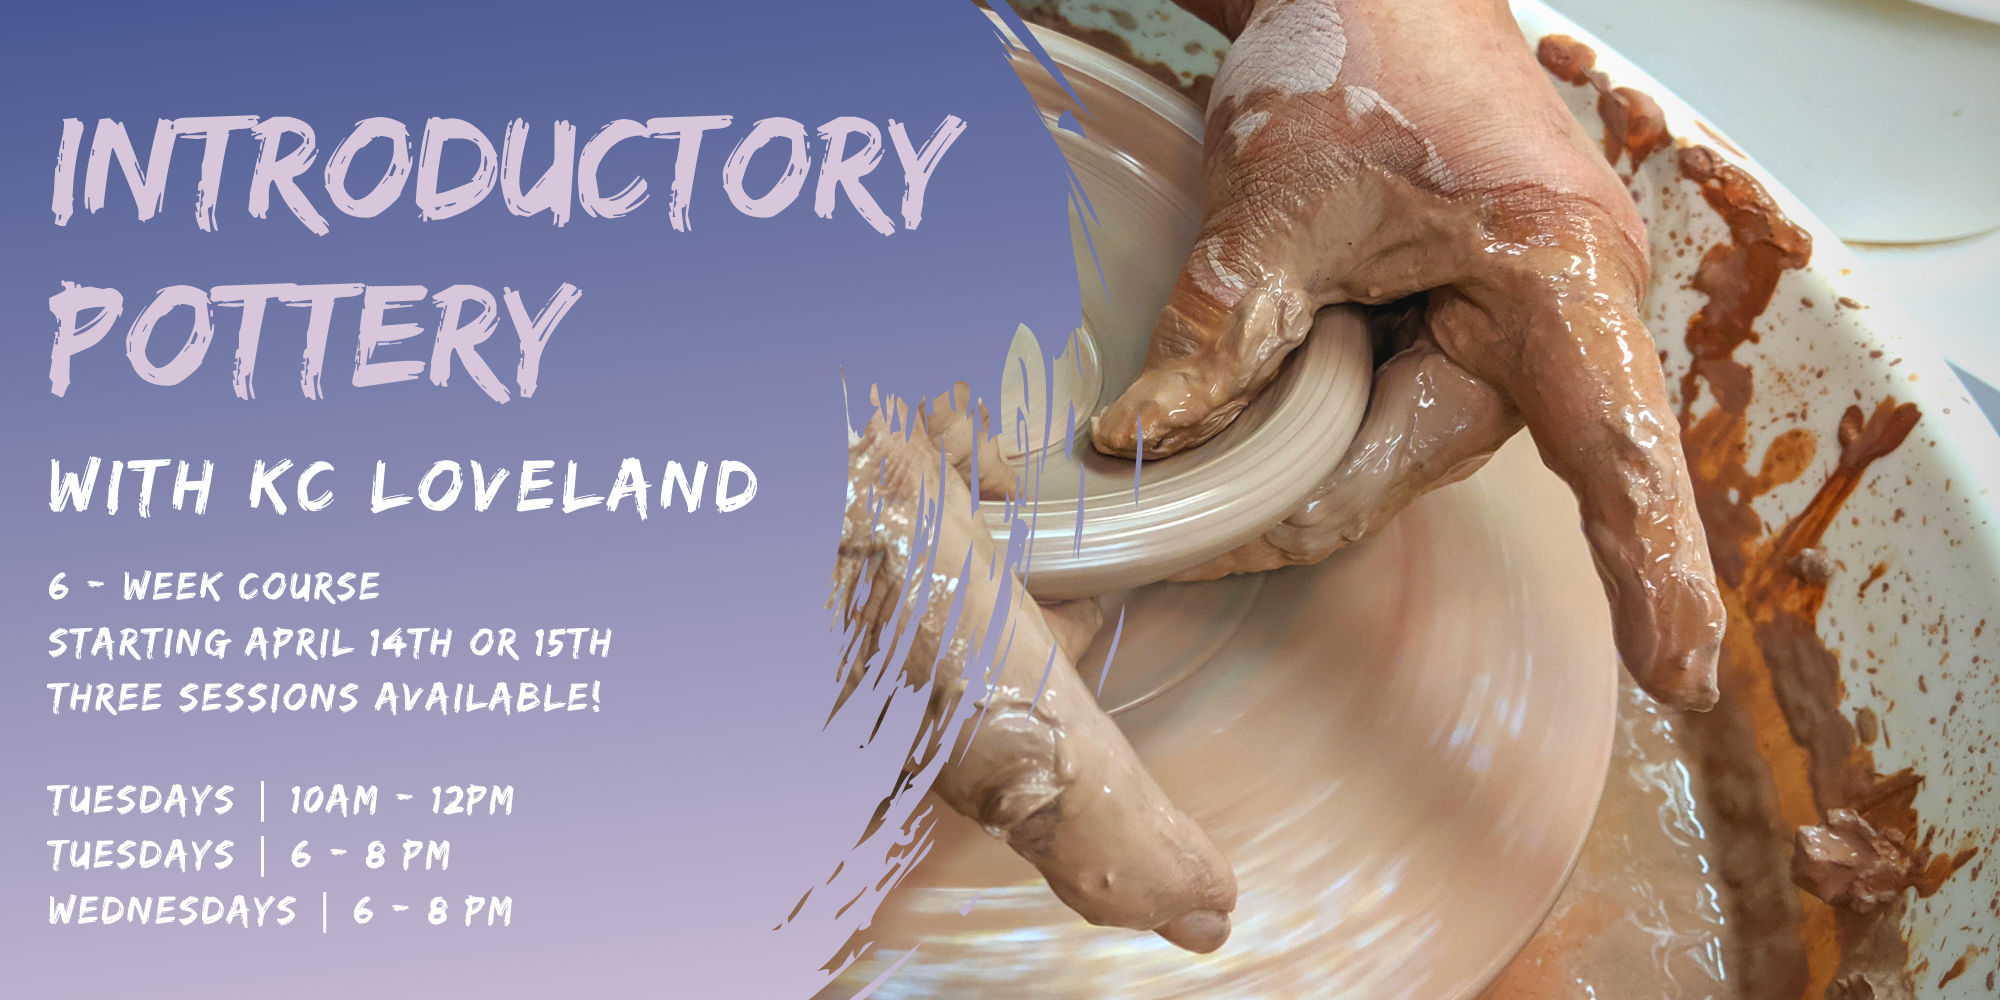 Introductory Pottery with KC Loveland: Wednesday PM